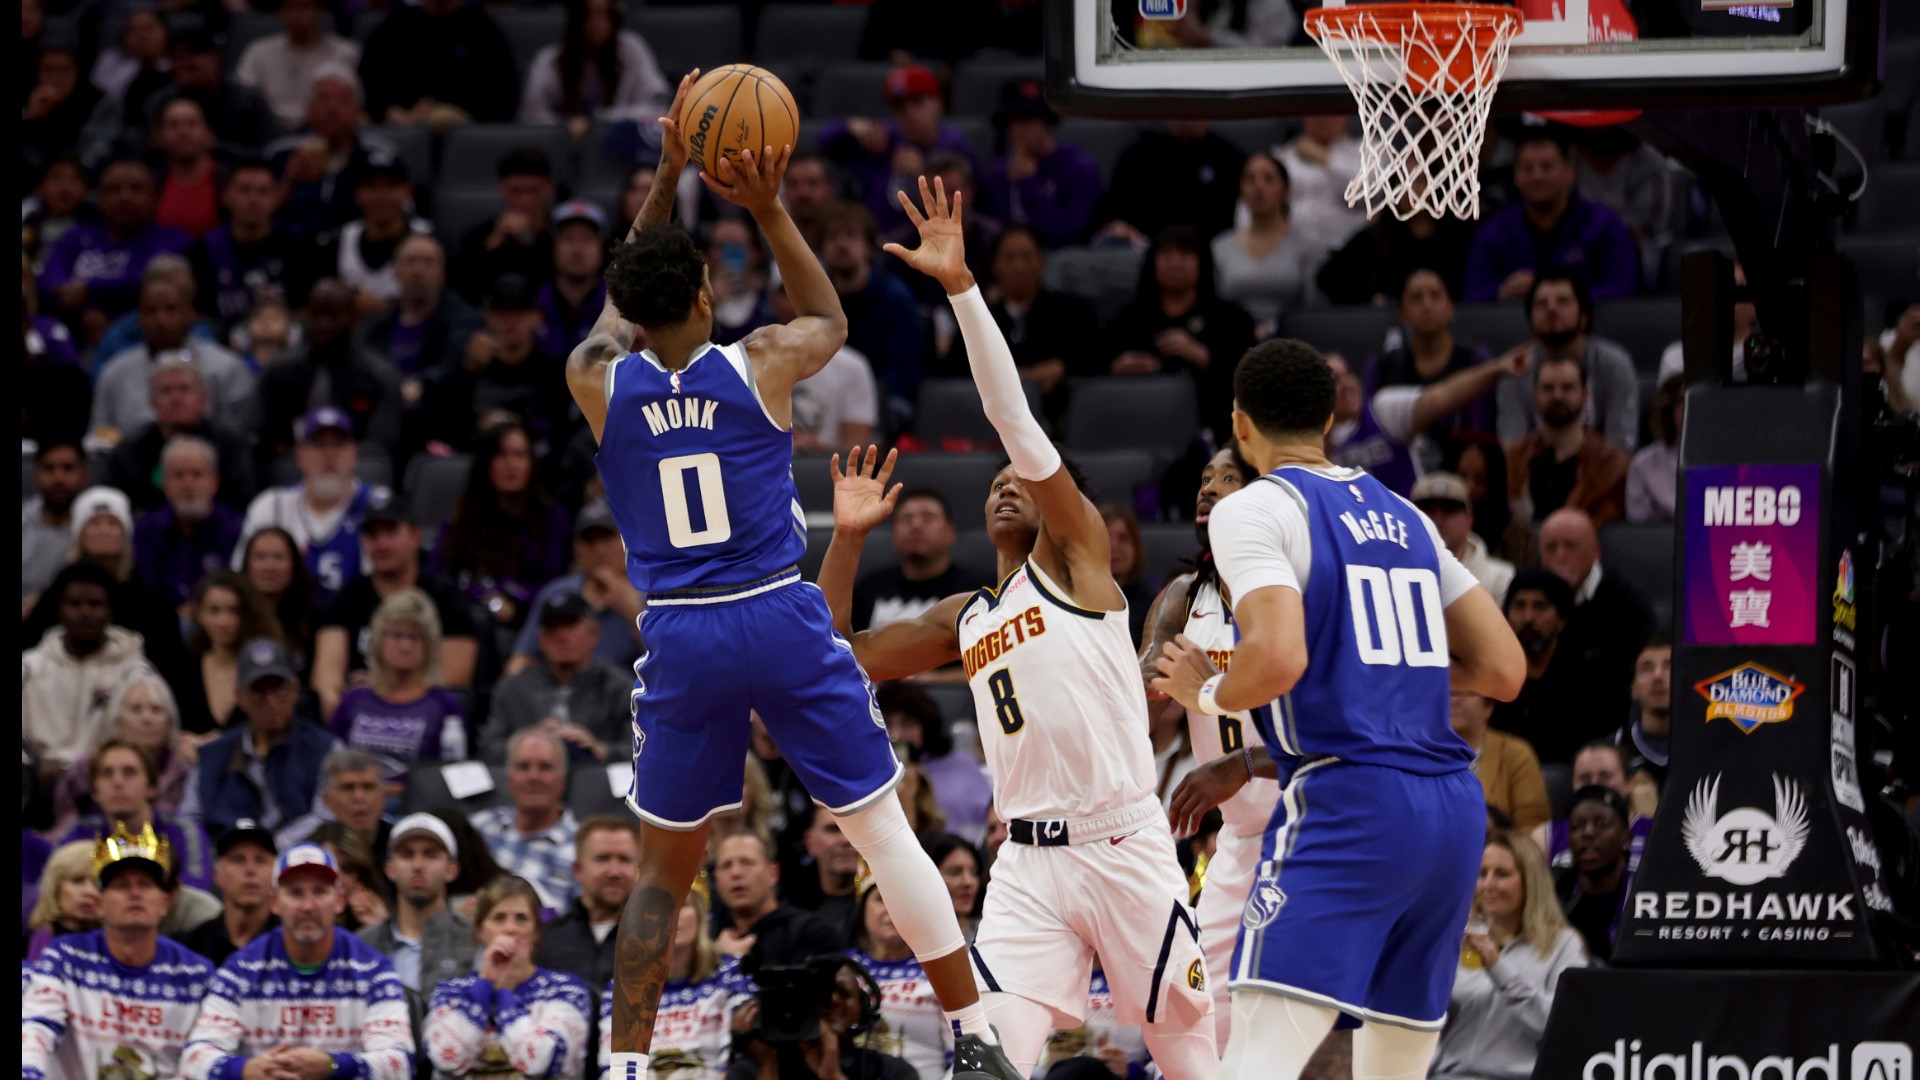 Sacramento Kings' Keegan Murray Faces Injury Scare in Tense Clash Against New Orleans Pelicans